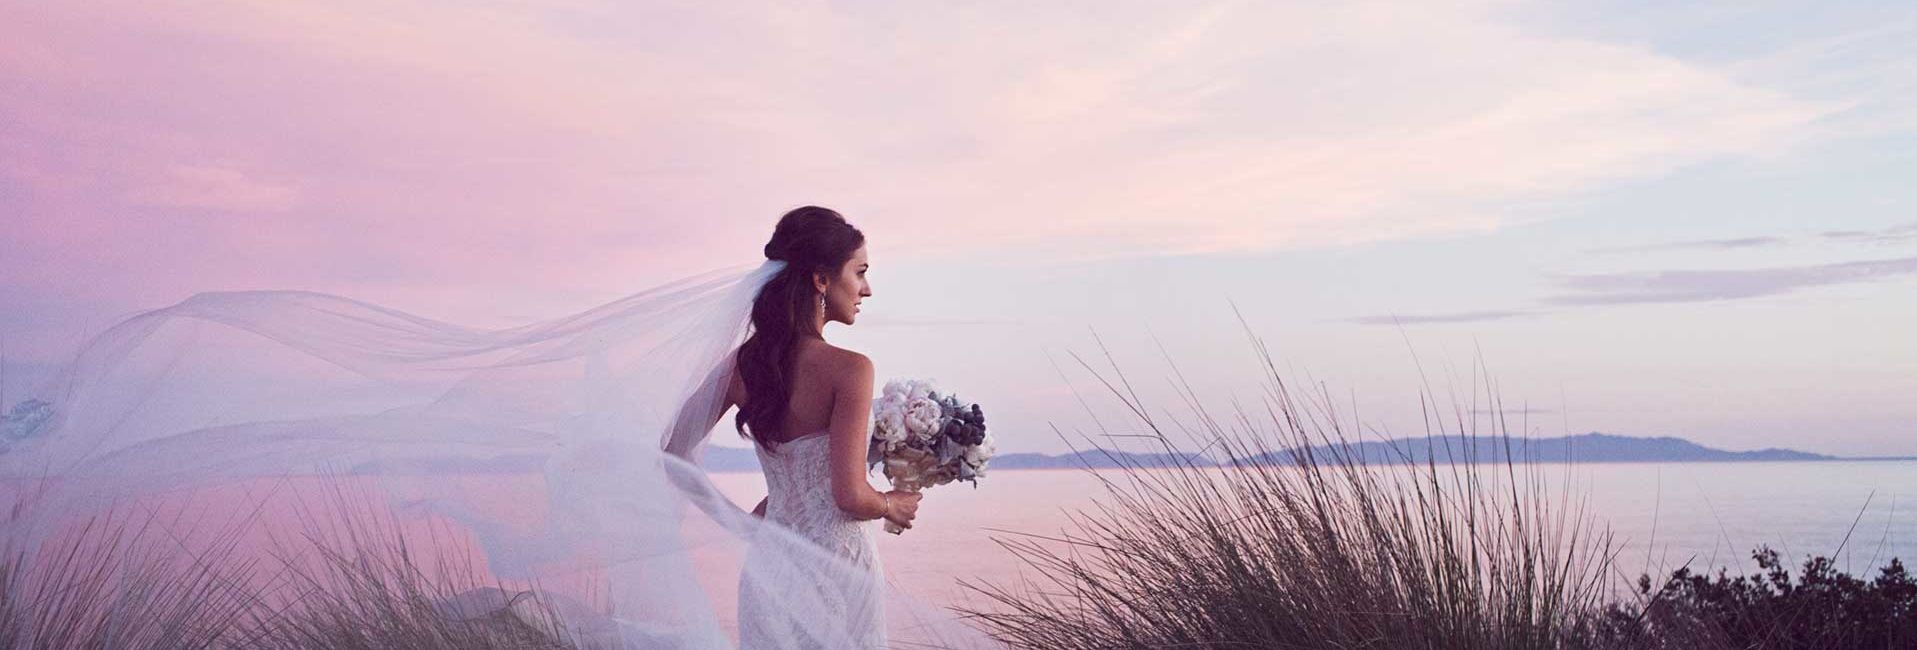 A Bride in her Wedding Dress with A Coastal View